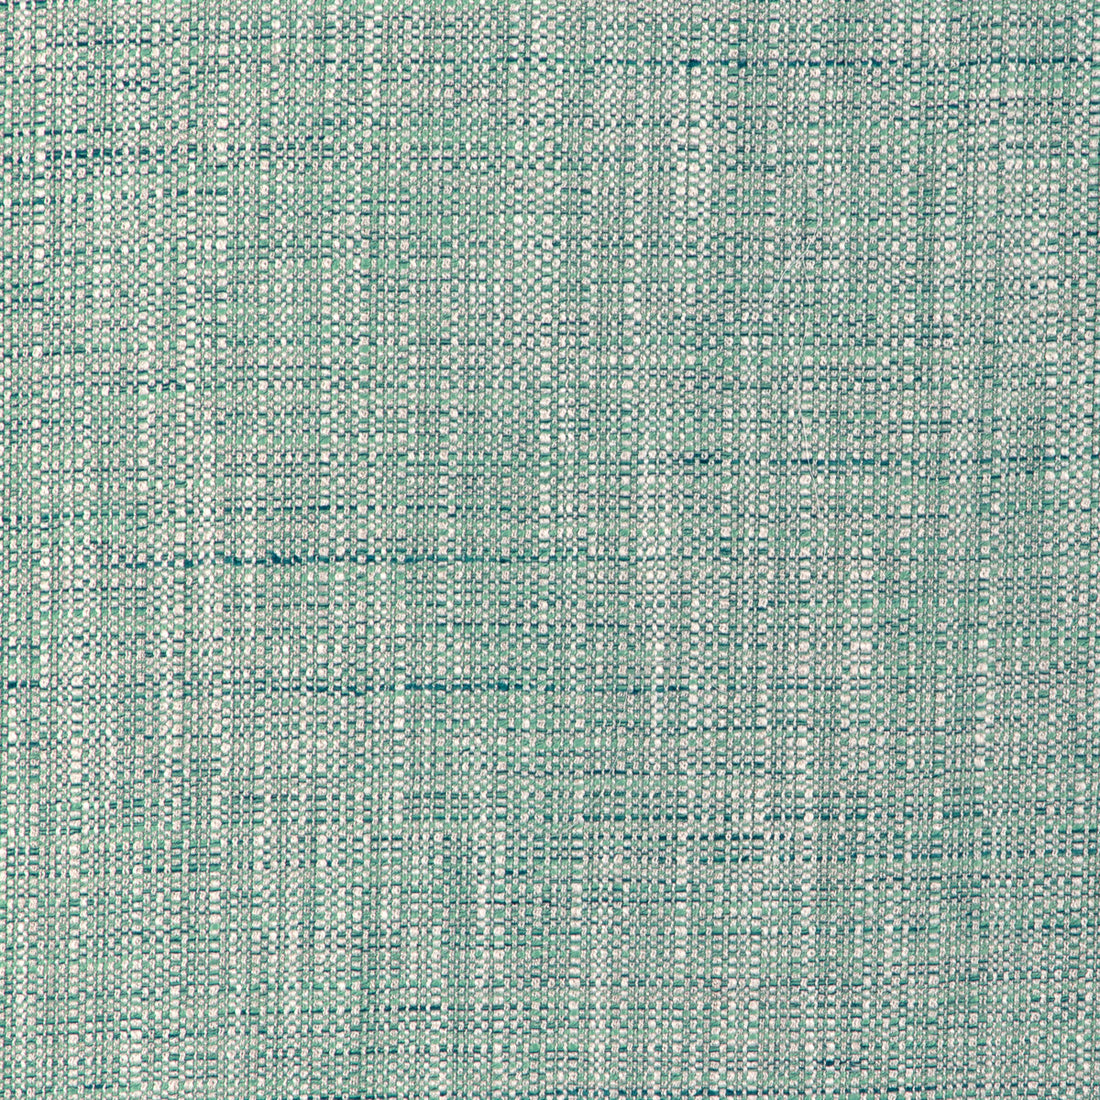 Kravet Design fabric in 37137-13 color - pattern 37137.13.0 - by Kravet Design in the Woven Colors collection